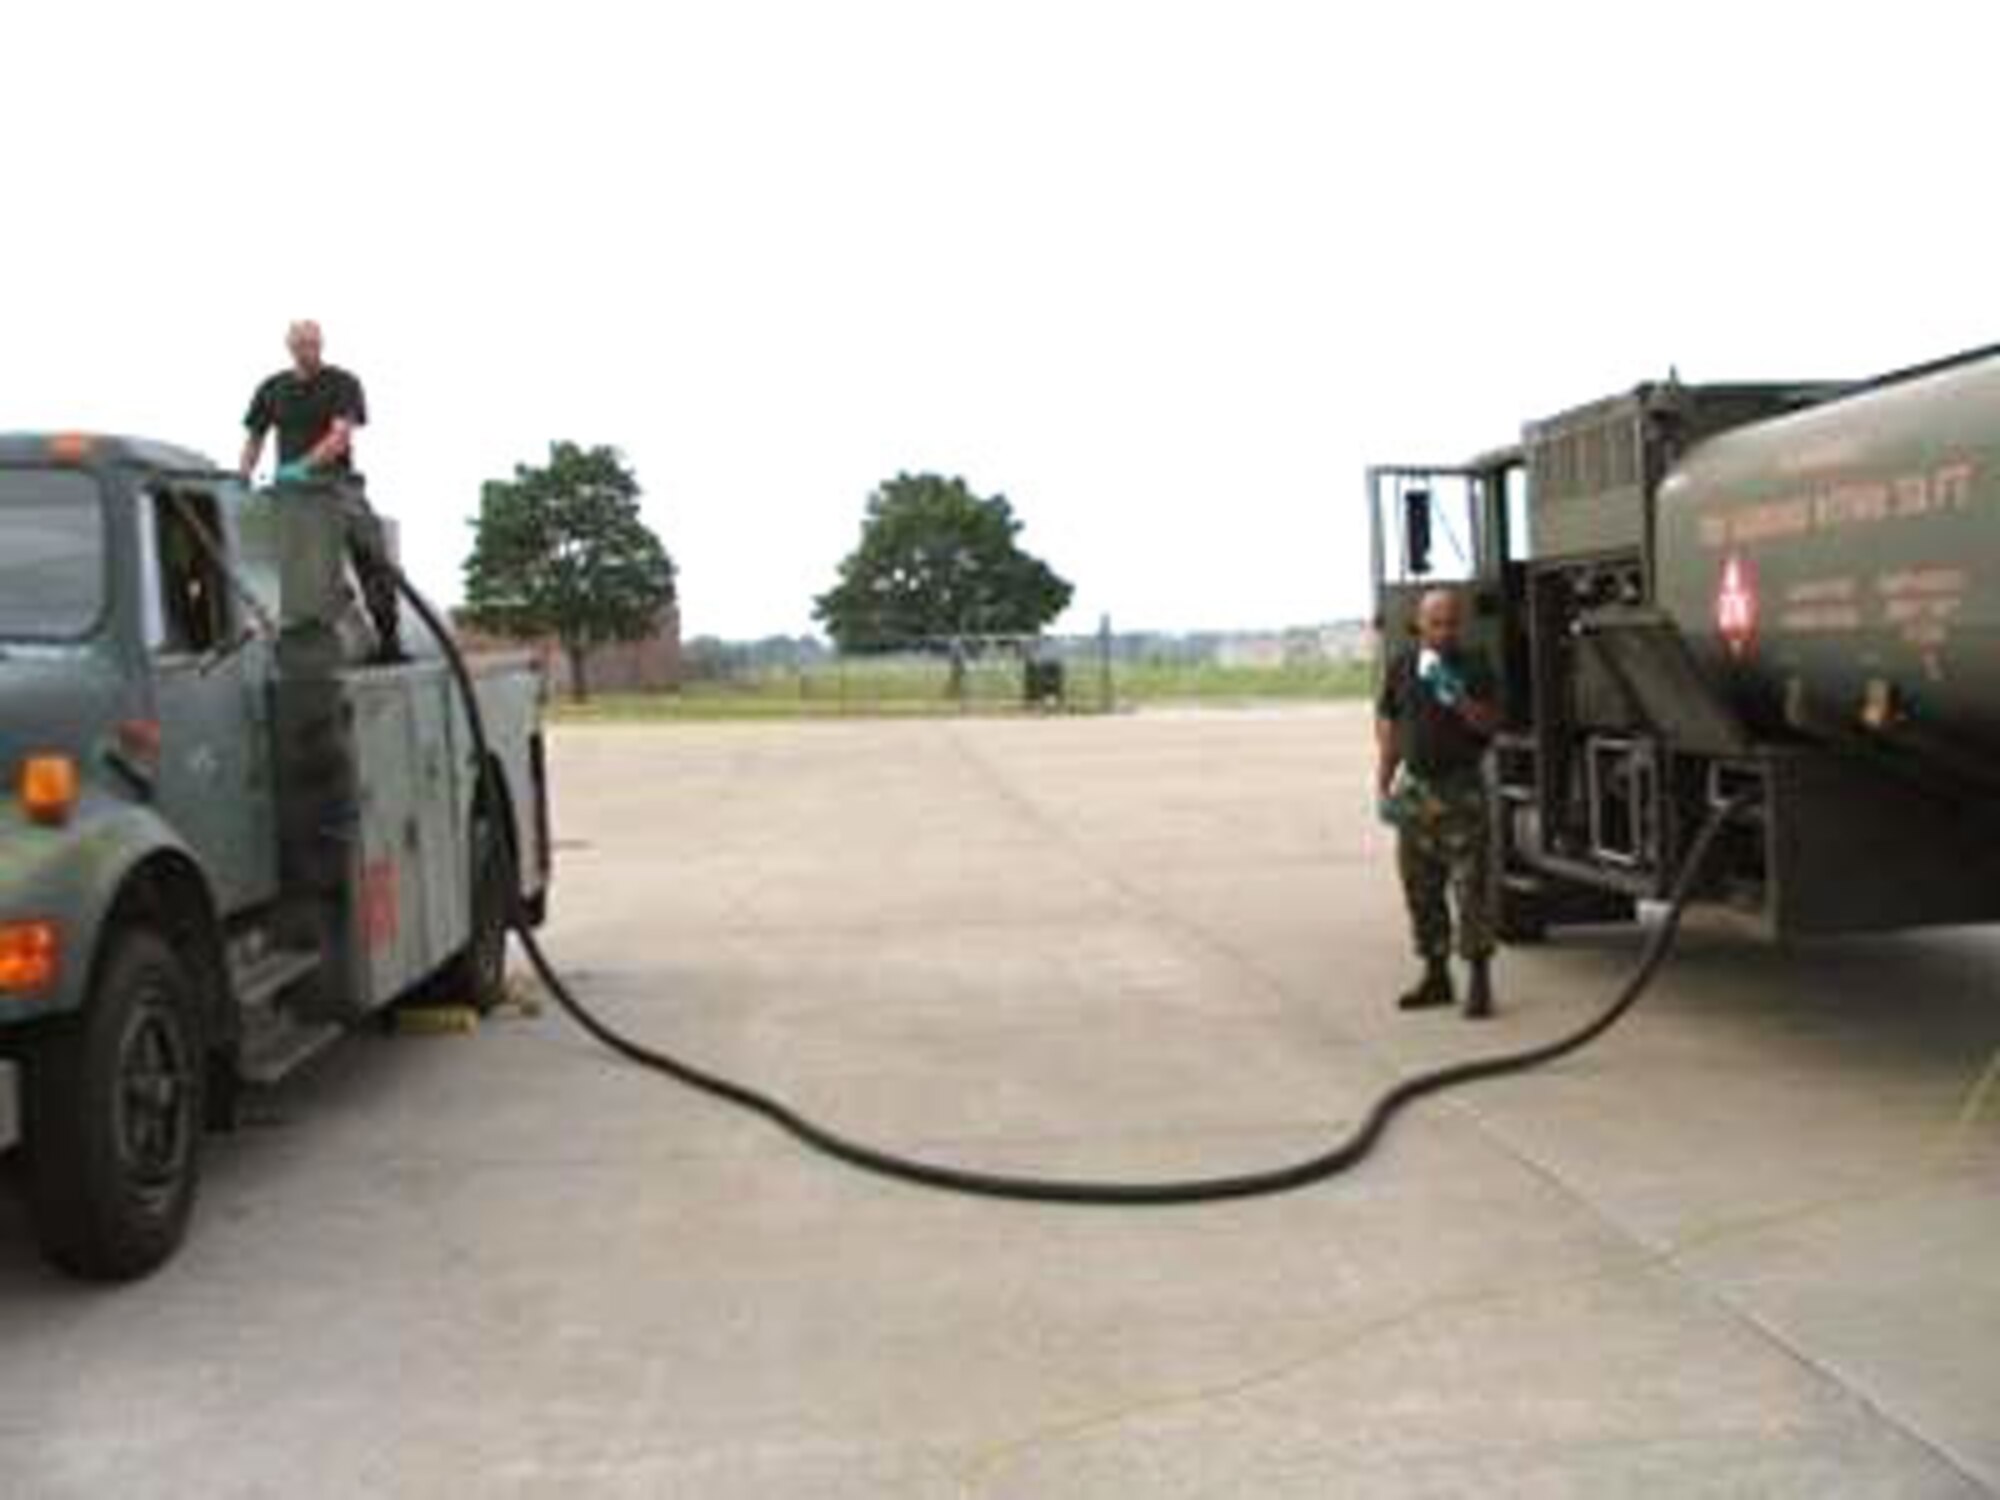 An R-11 fueler at Selfridge Air National Guard Base, Mich., pumps synthetic S8 FT fuel into another vehicle that normally runs on JP-8 jet fuel. The Air Force Advanced Power Technology Office at Robins Air Force Base, Ga., is developing a synthetic fuel for use in ground vehicles. (U.S. Air Force photo) 